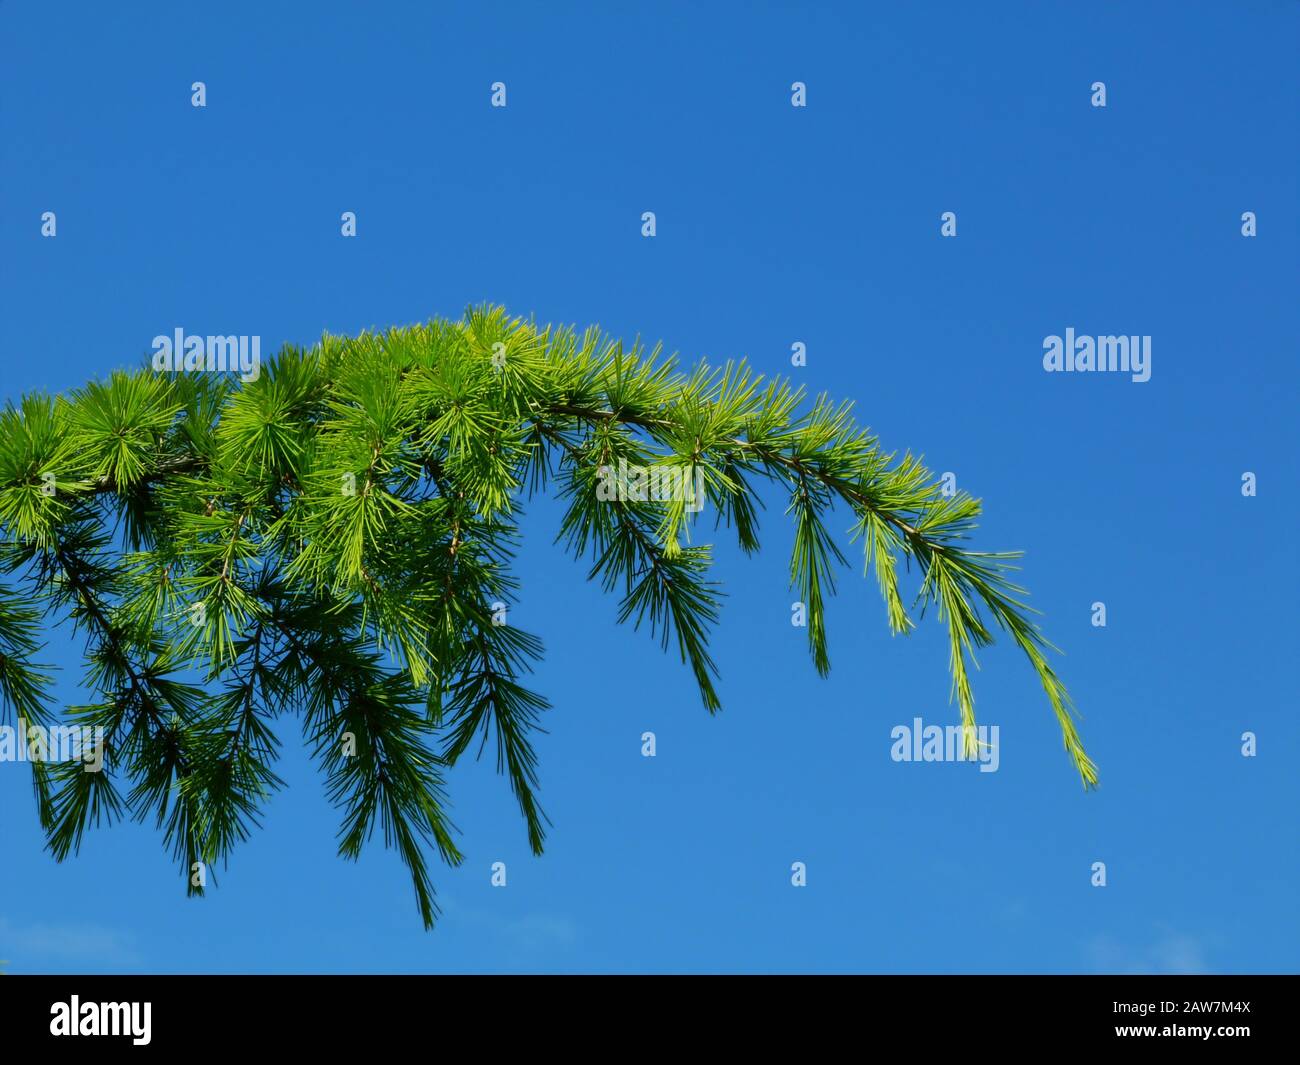 light evergreen twigs and short bright green pine needles. beauty in nature concept. calming effect. parks, outdoors and nature. green and blue colors Stock Photo